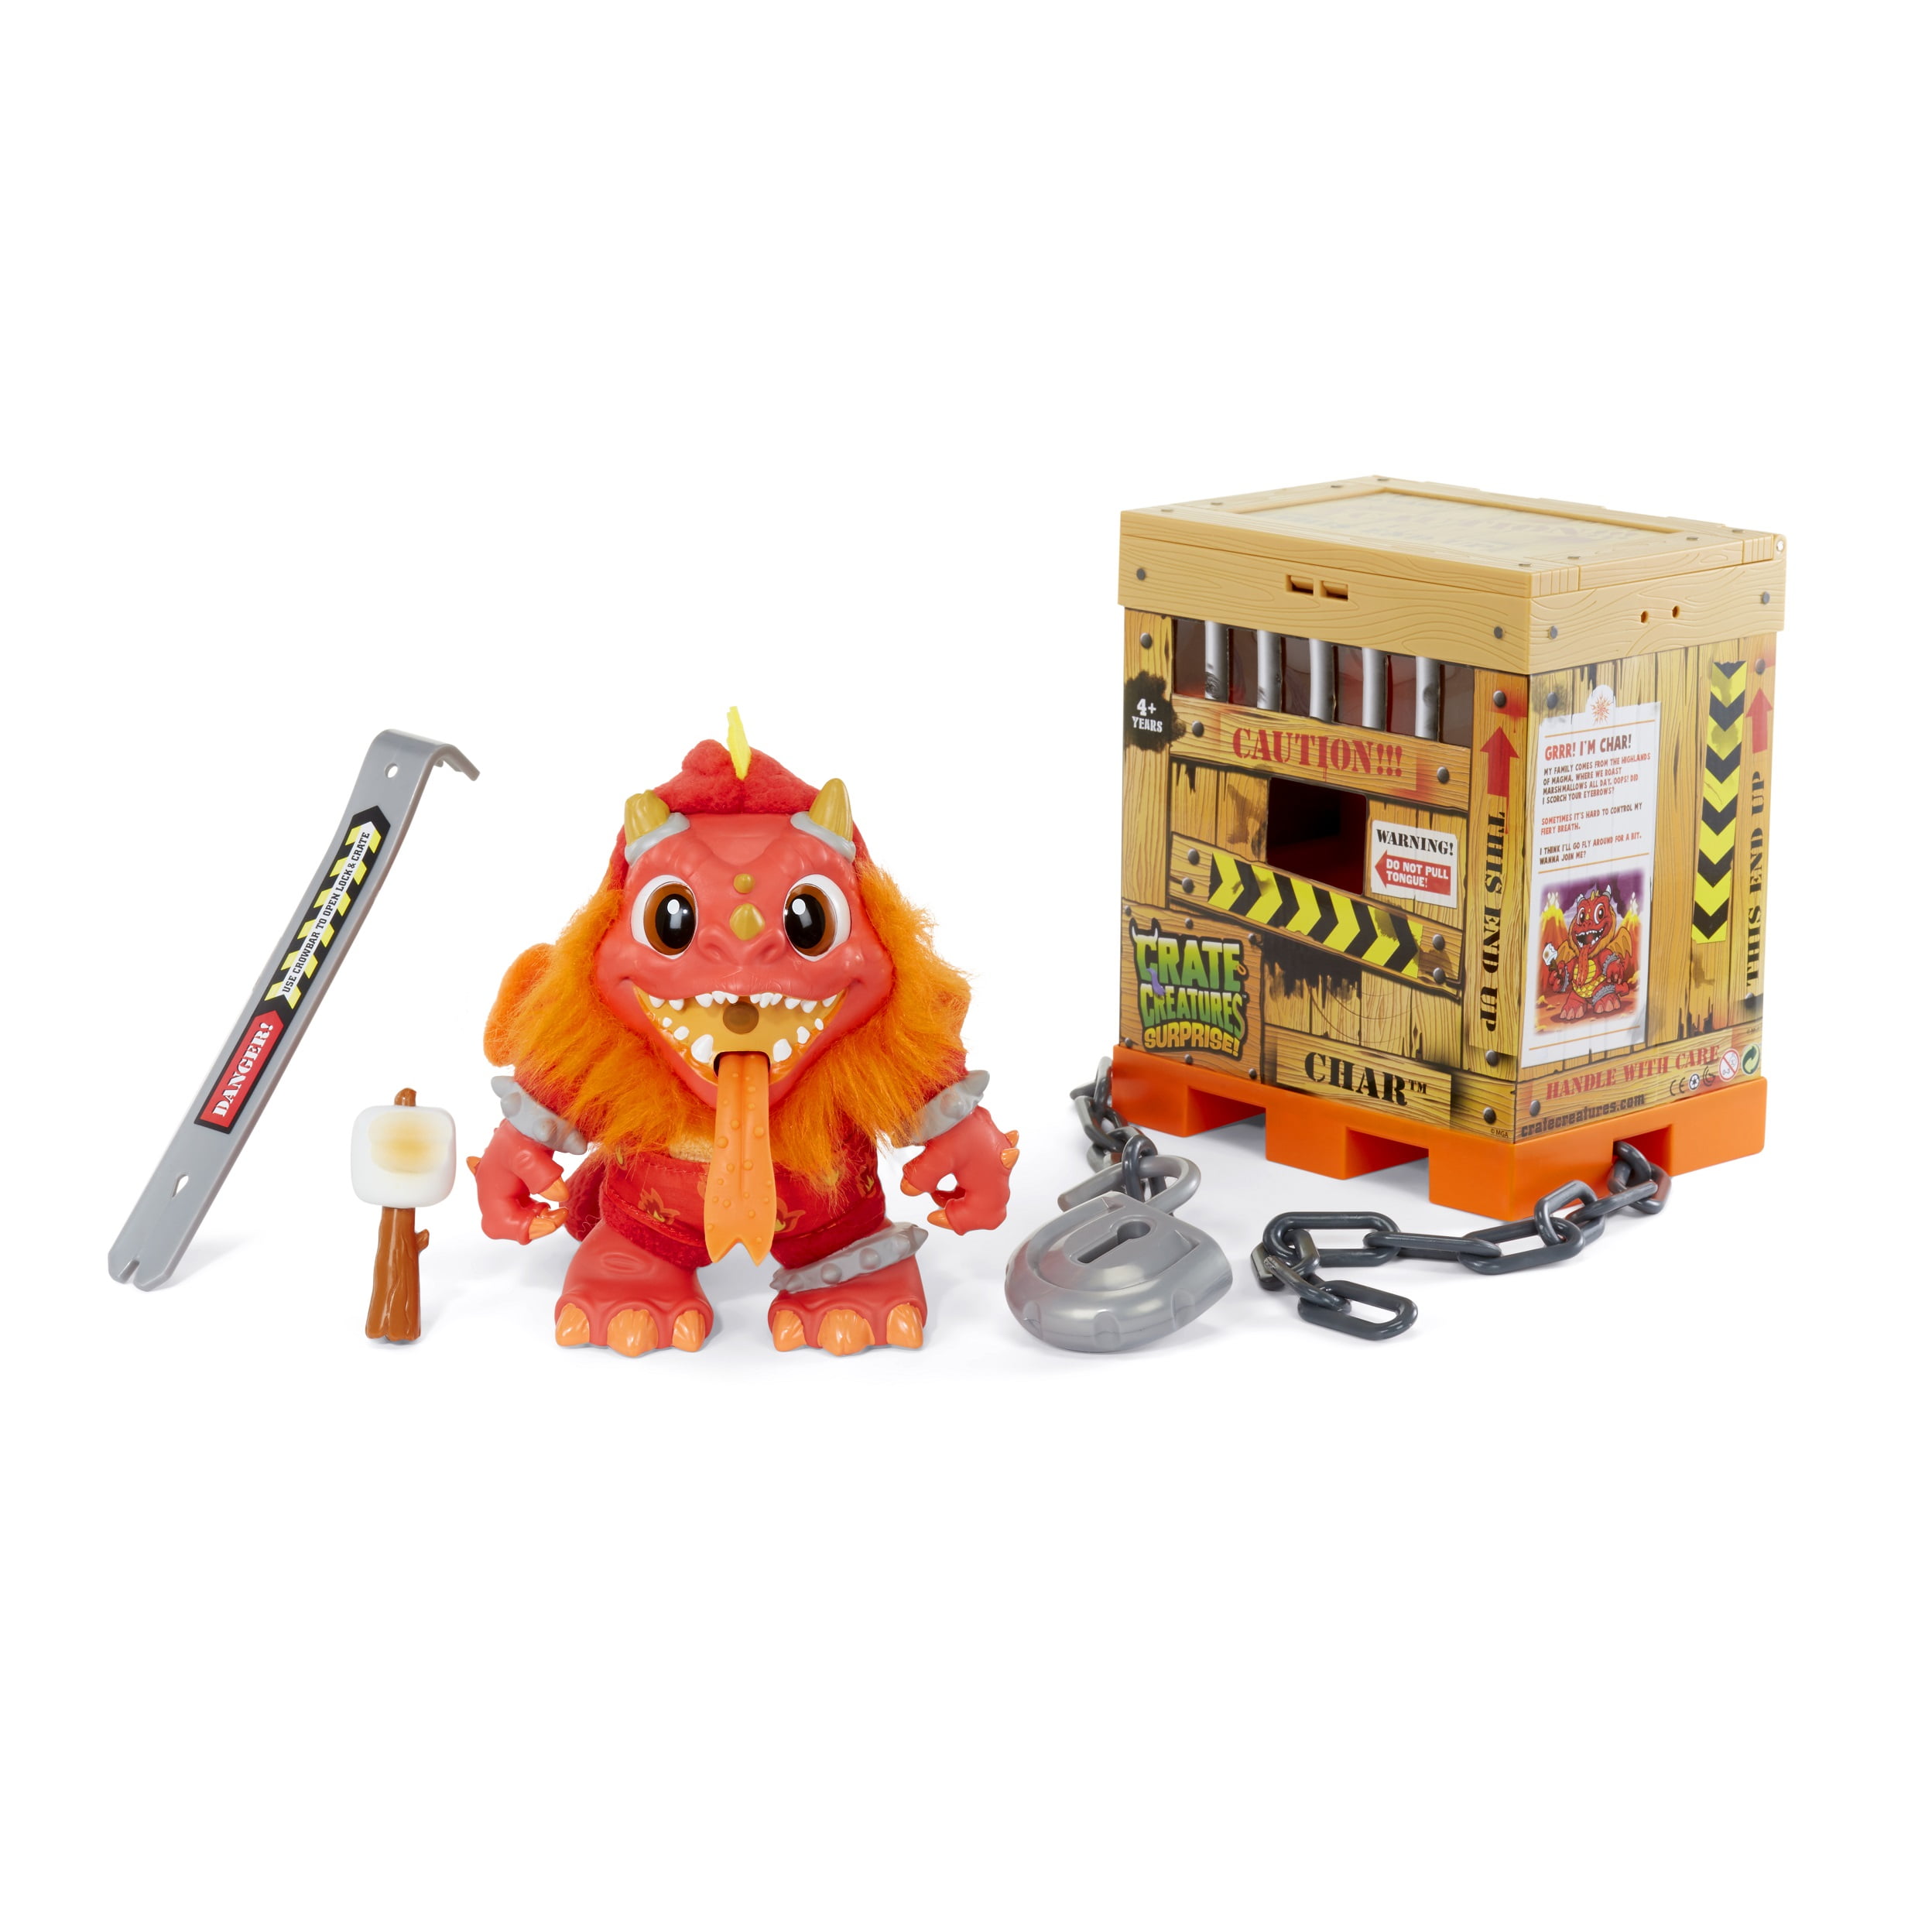 2018 Crate Creatures Surprise Toy Char With Lock for sale online 